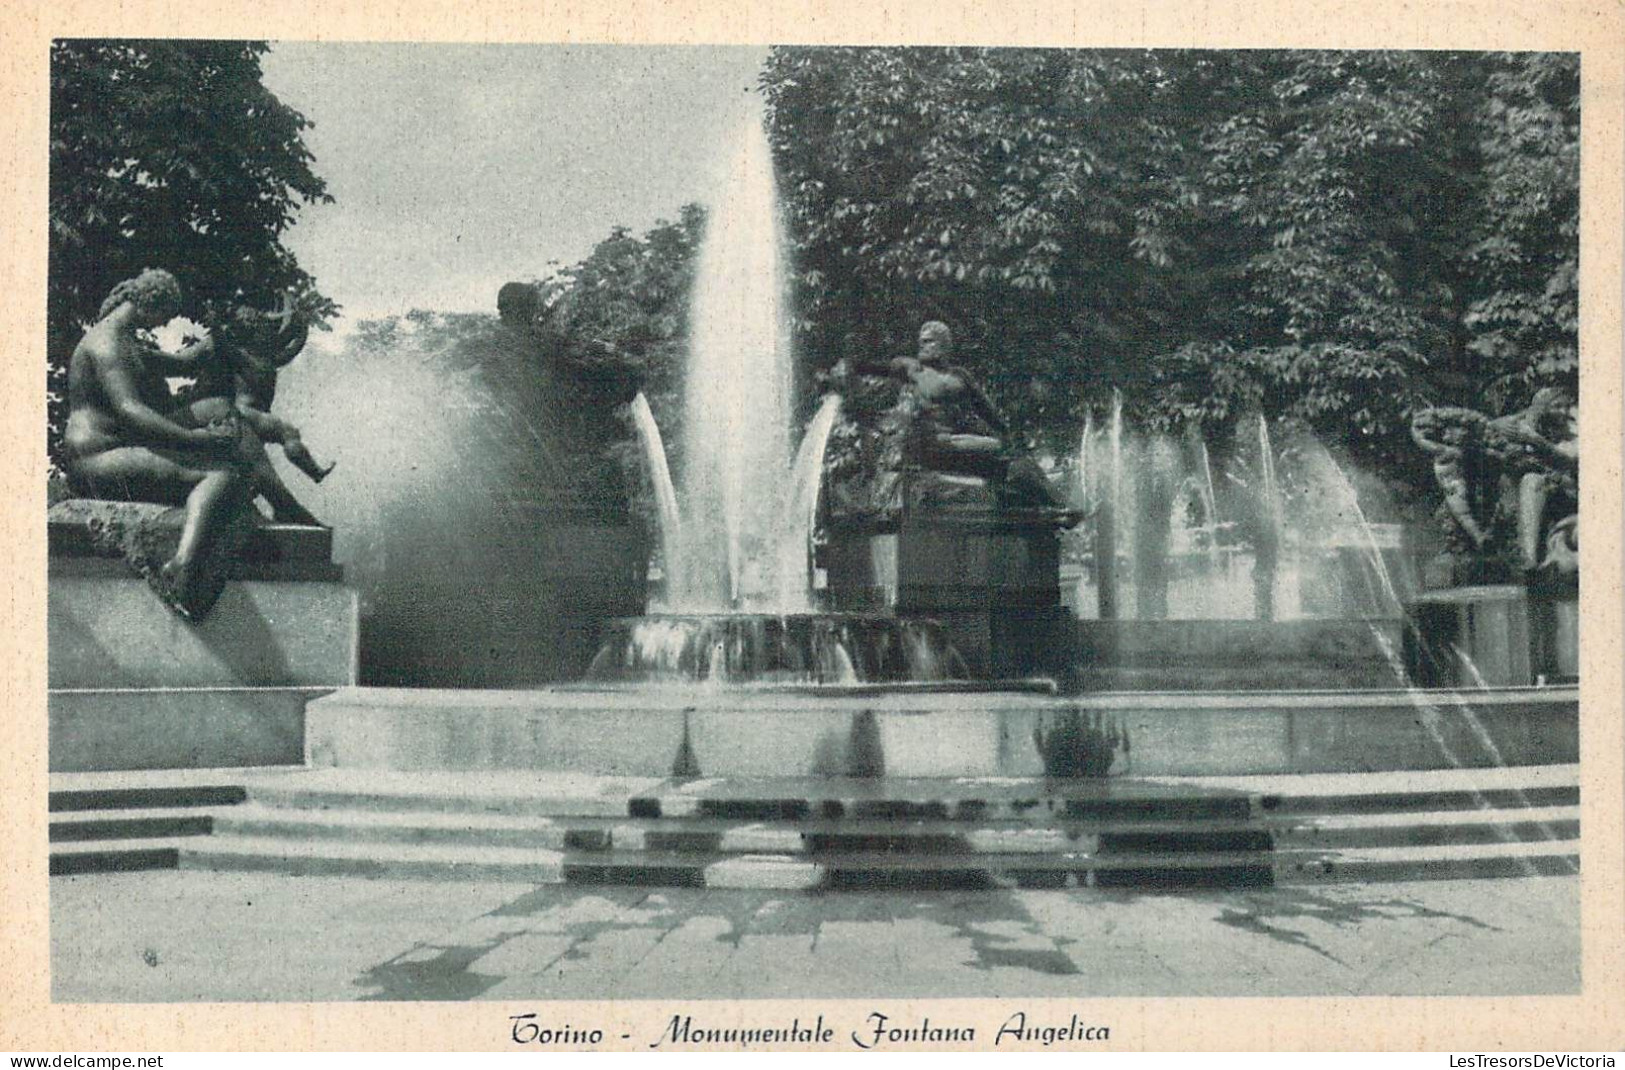 ITALIE - Torino - Monumentale Fontana Angelica - Carte Postale Ancienne - Other Monuments & Buildings